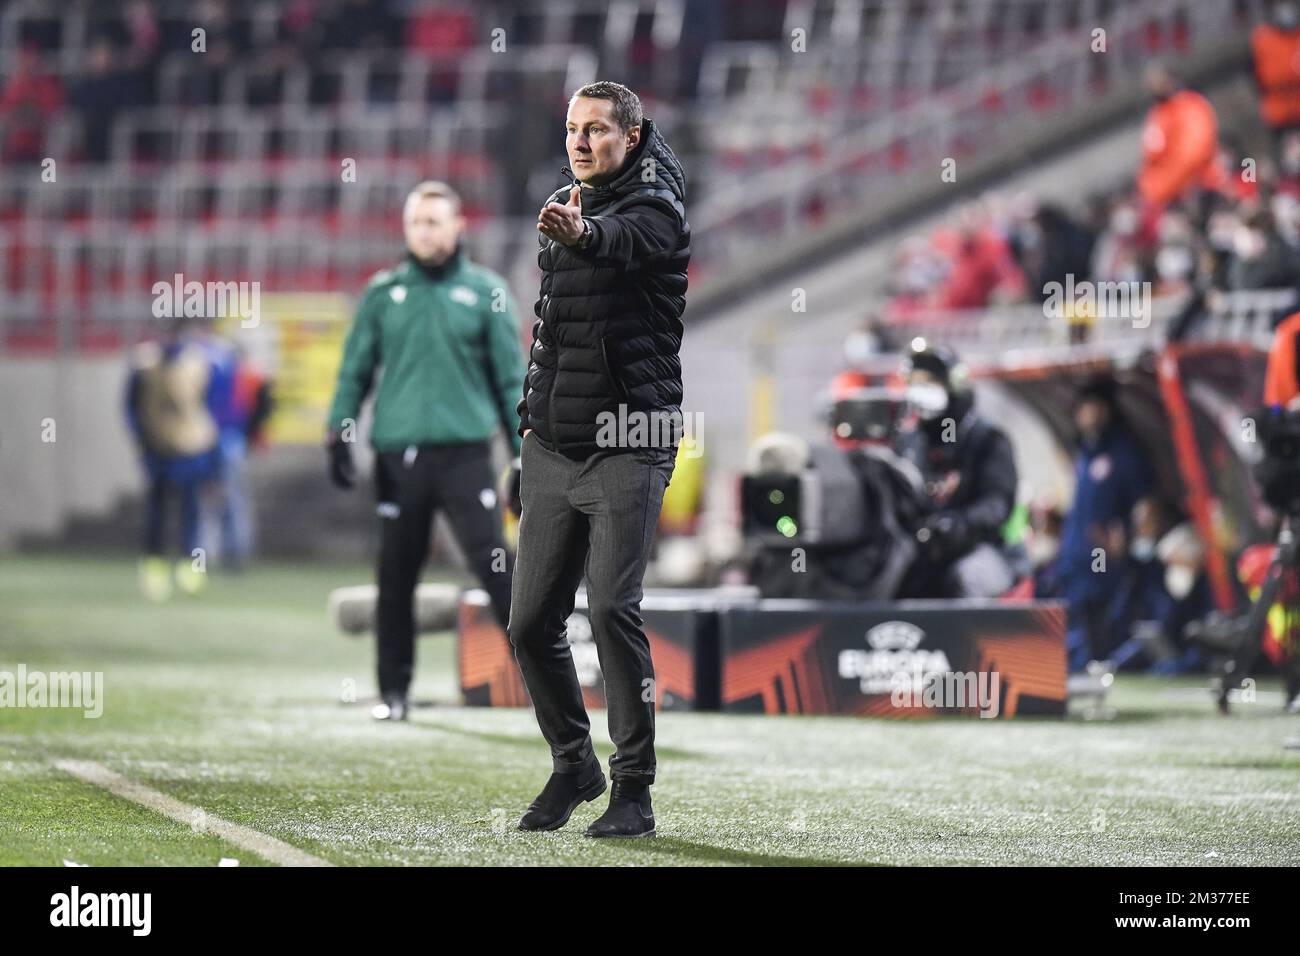 Antwerp's head coach Brian Priske pictured during an Europa League game between Belgian soccer team Royal Antwerp FC and Greek soccer team Olympiacos F.C., Thursday 09 December 2021, in Antwerp, Belgium, on the sixth and last day in Group D of the UEFA Europa League group stage. BELGA PHOTO TOM GOYVAERTS Stock Photo